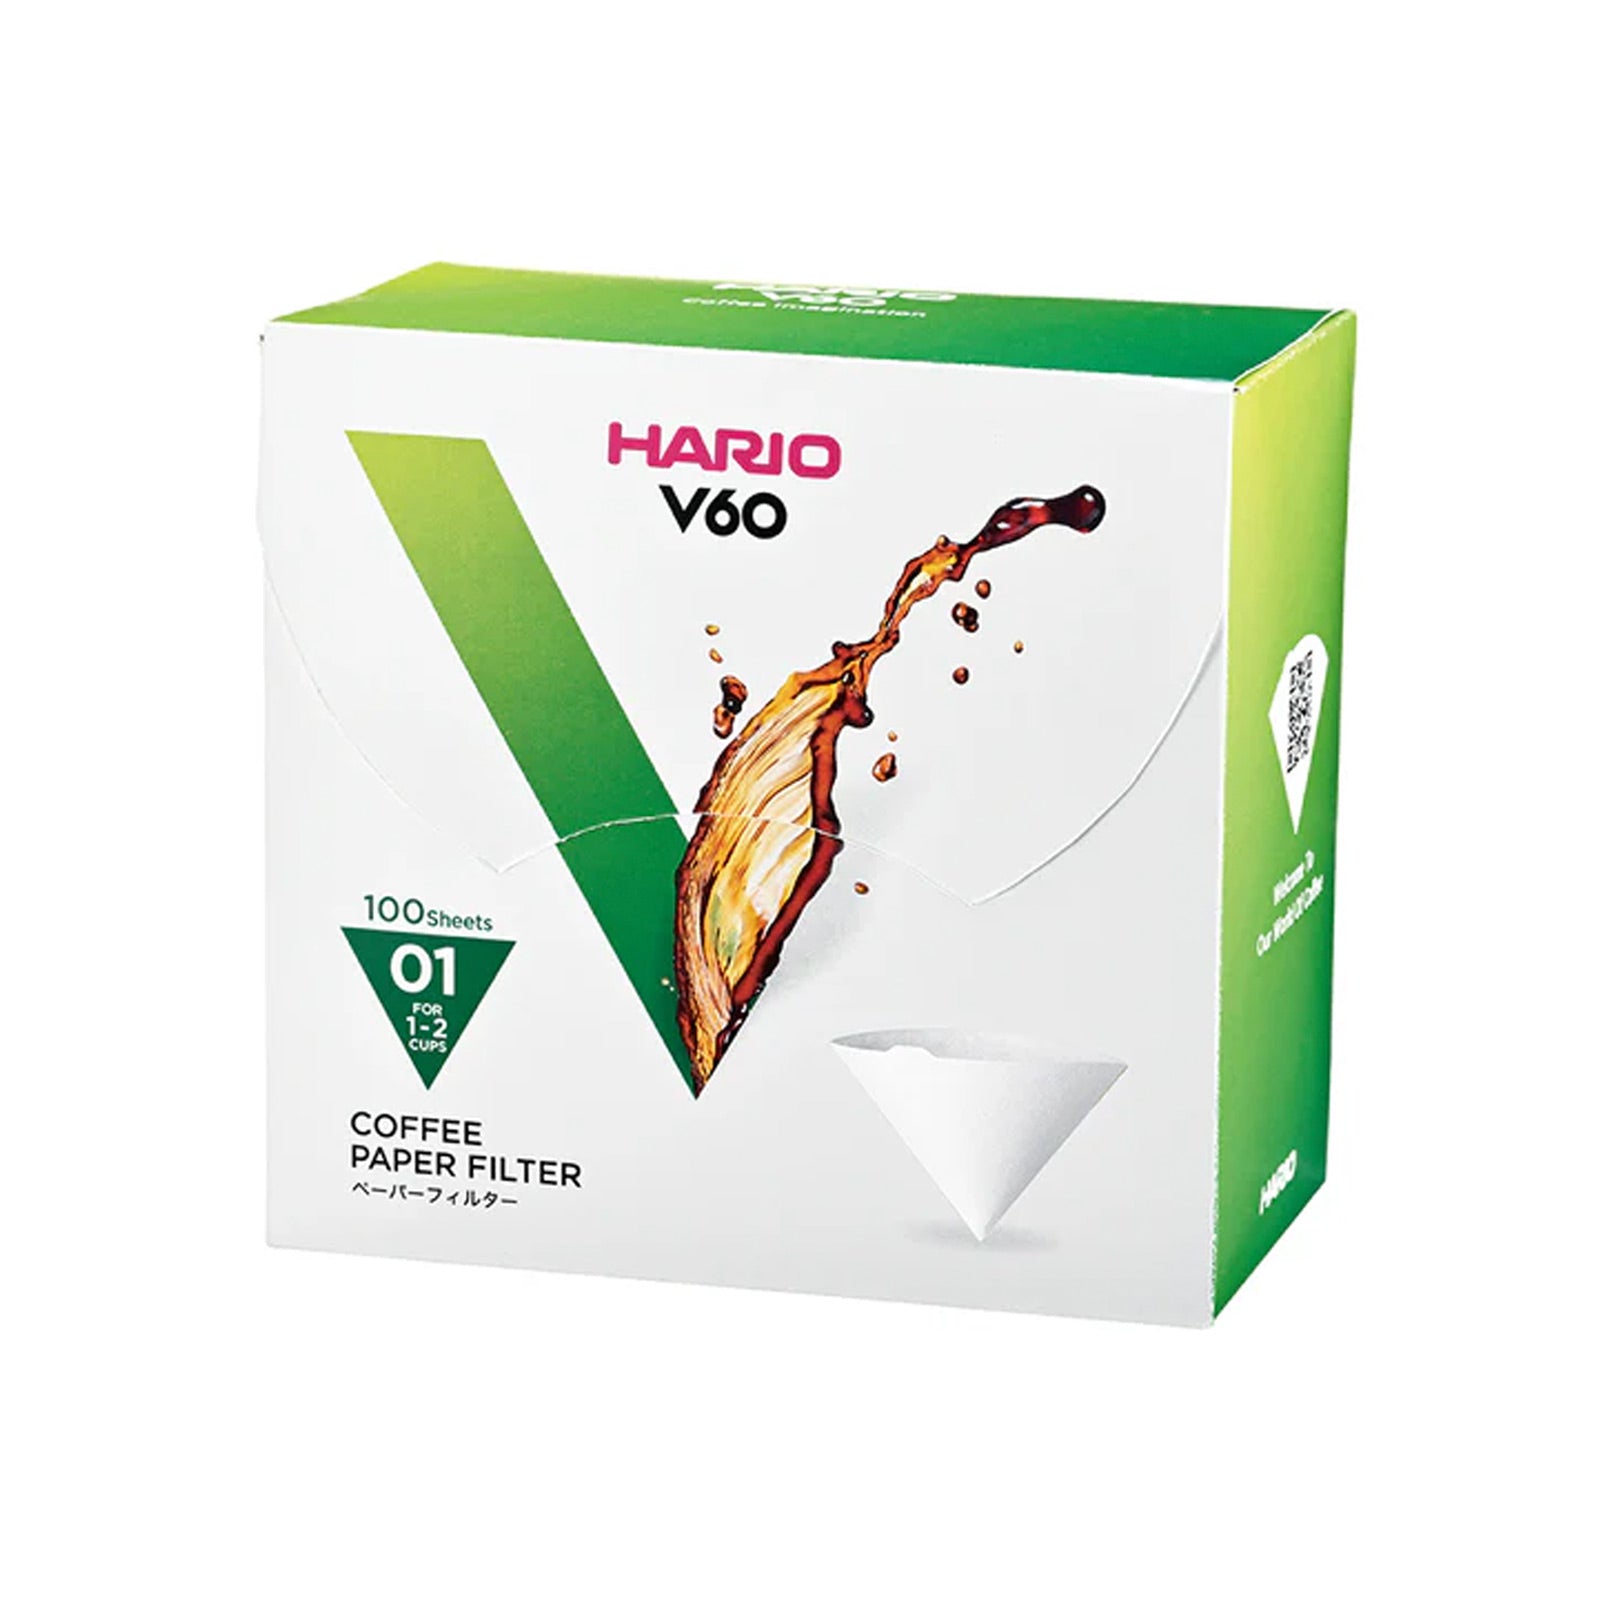 Hario V60 Paperfilters